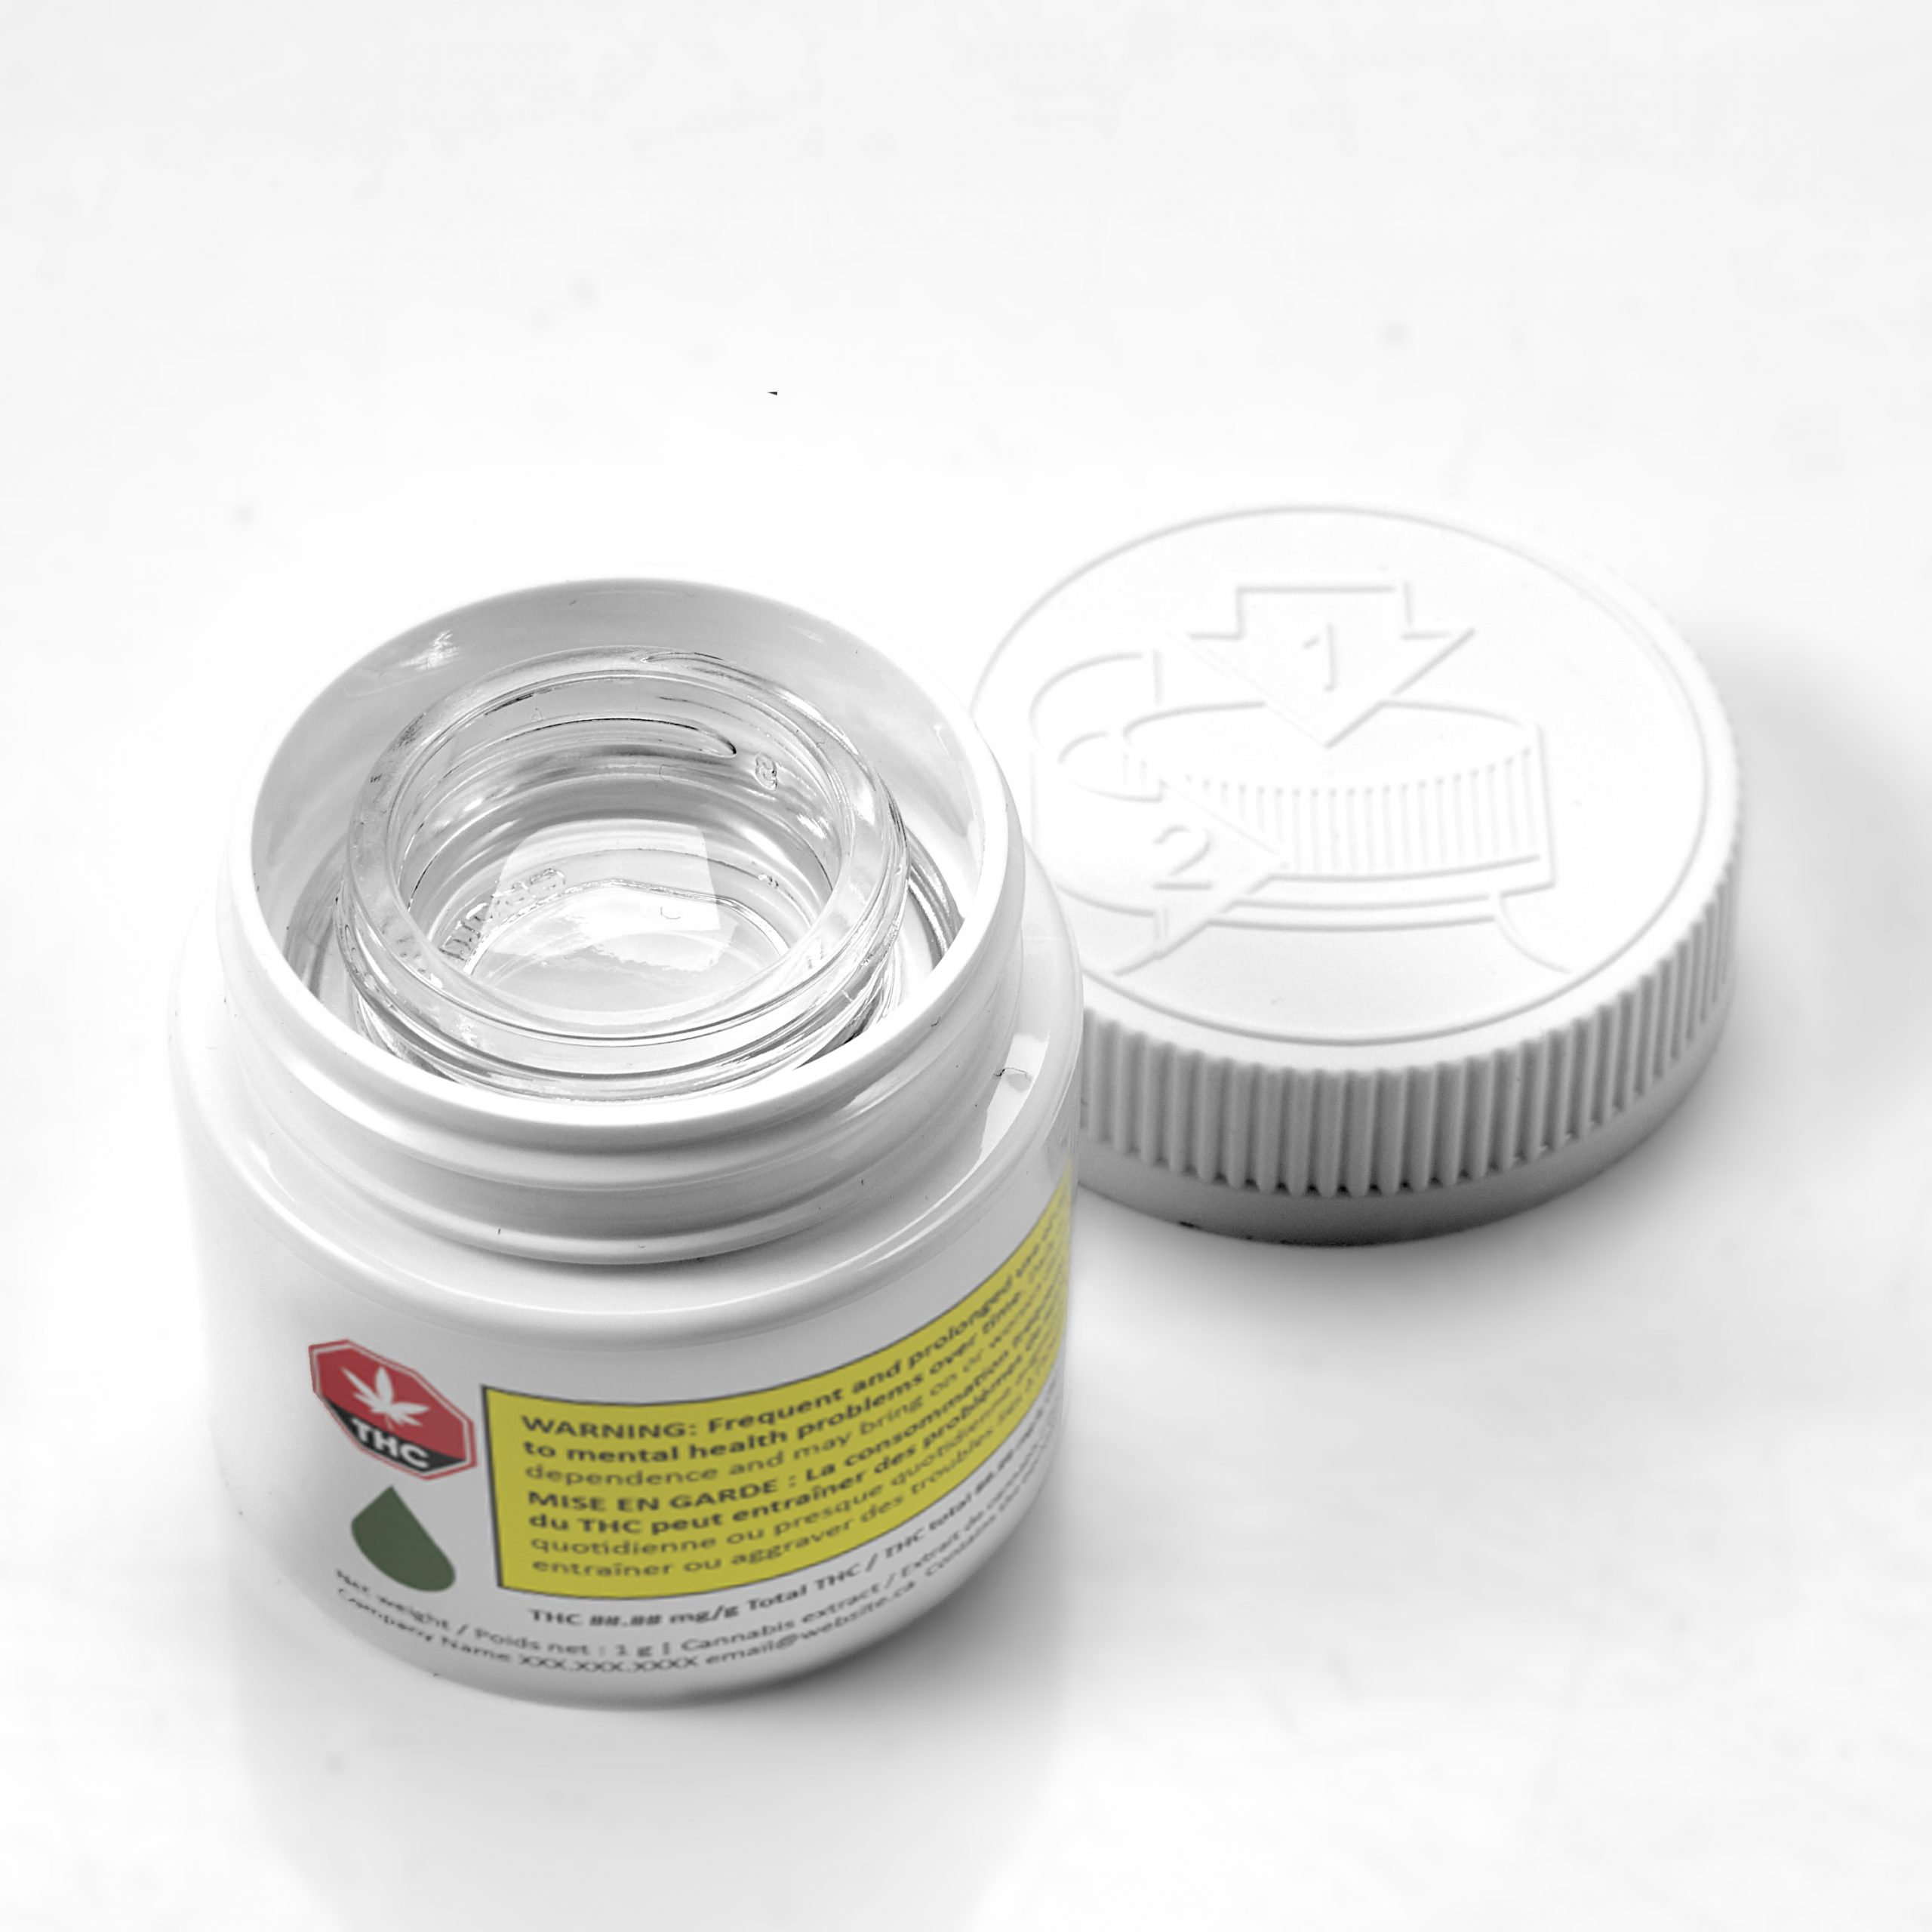 Cannasupplies CanDab9 Packaging Solution for concentrated extracts